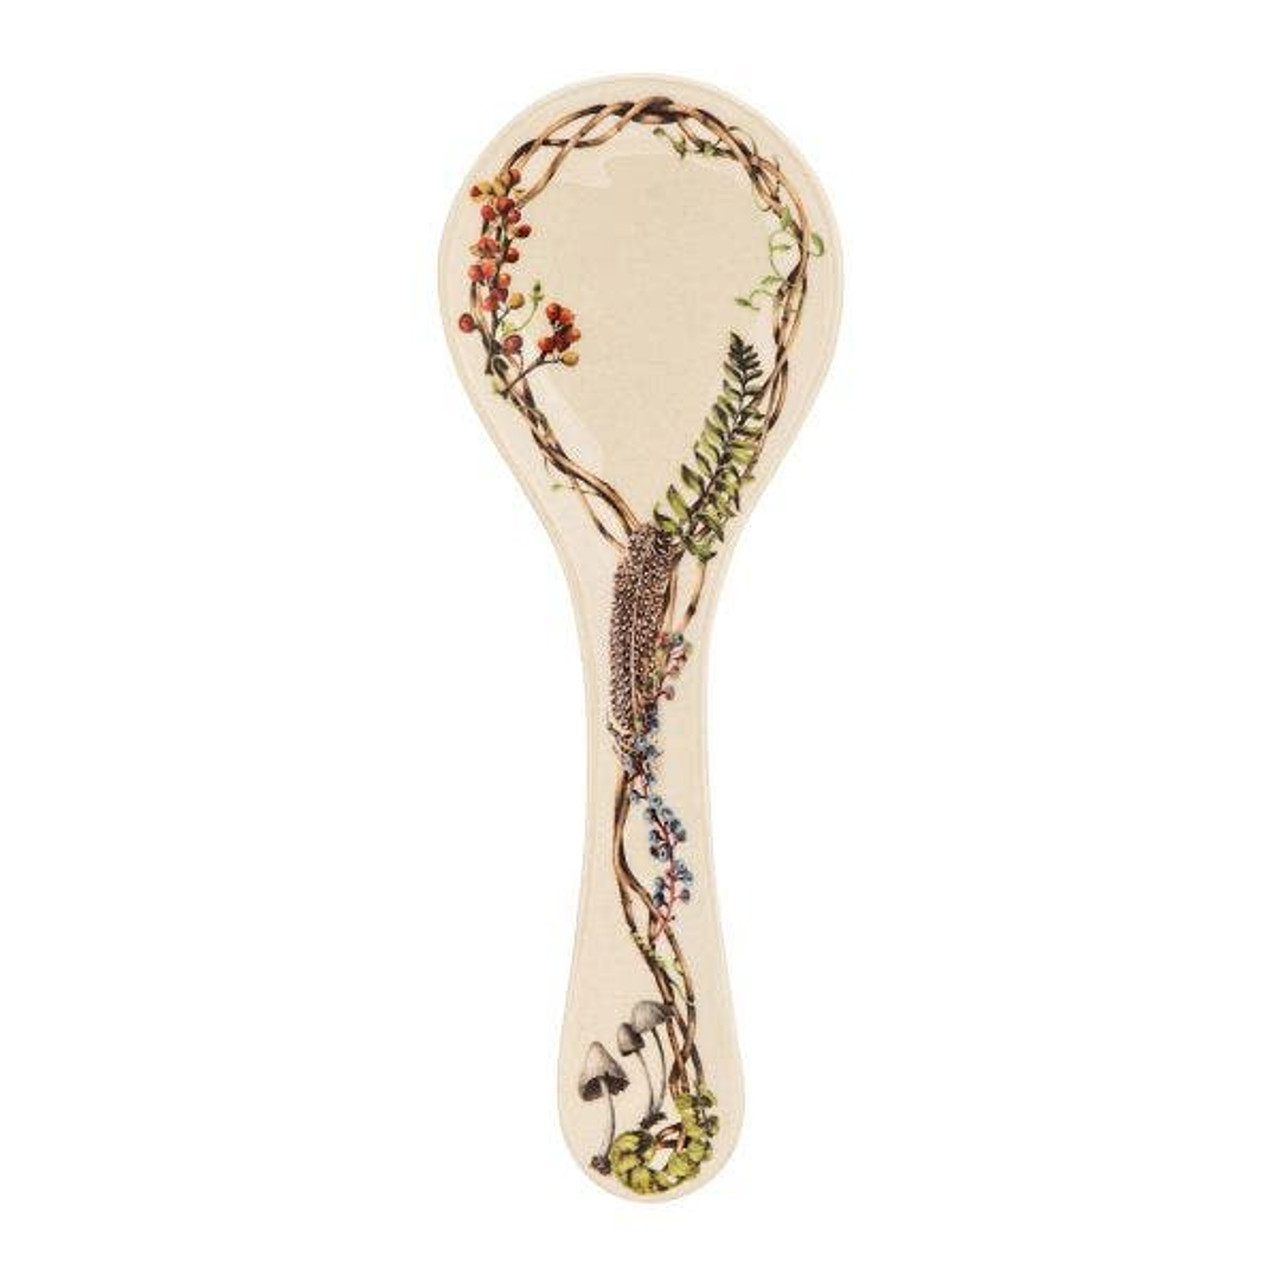 NEW! Forest Walk Spoon Rest